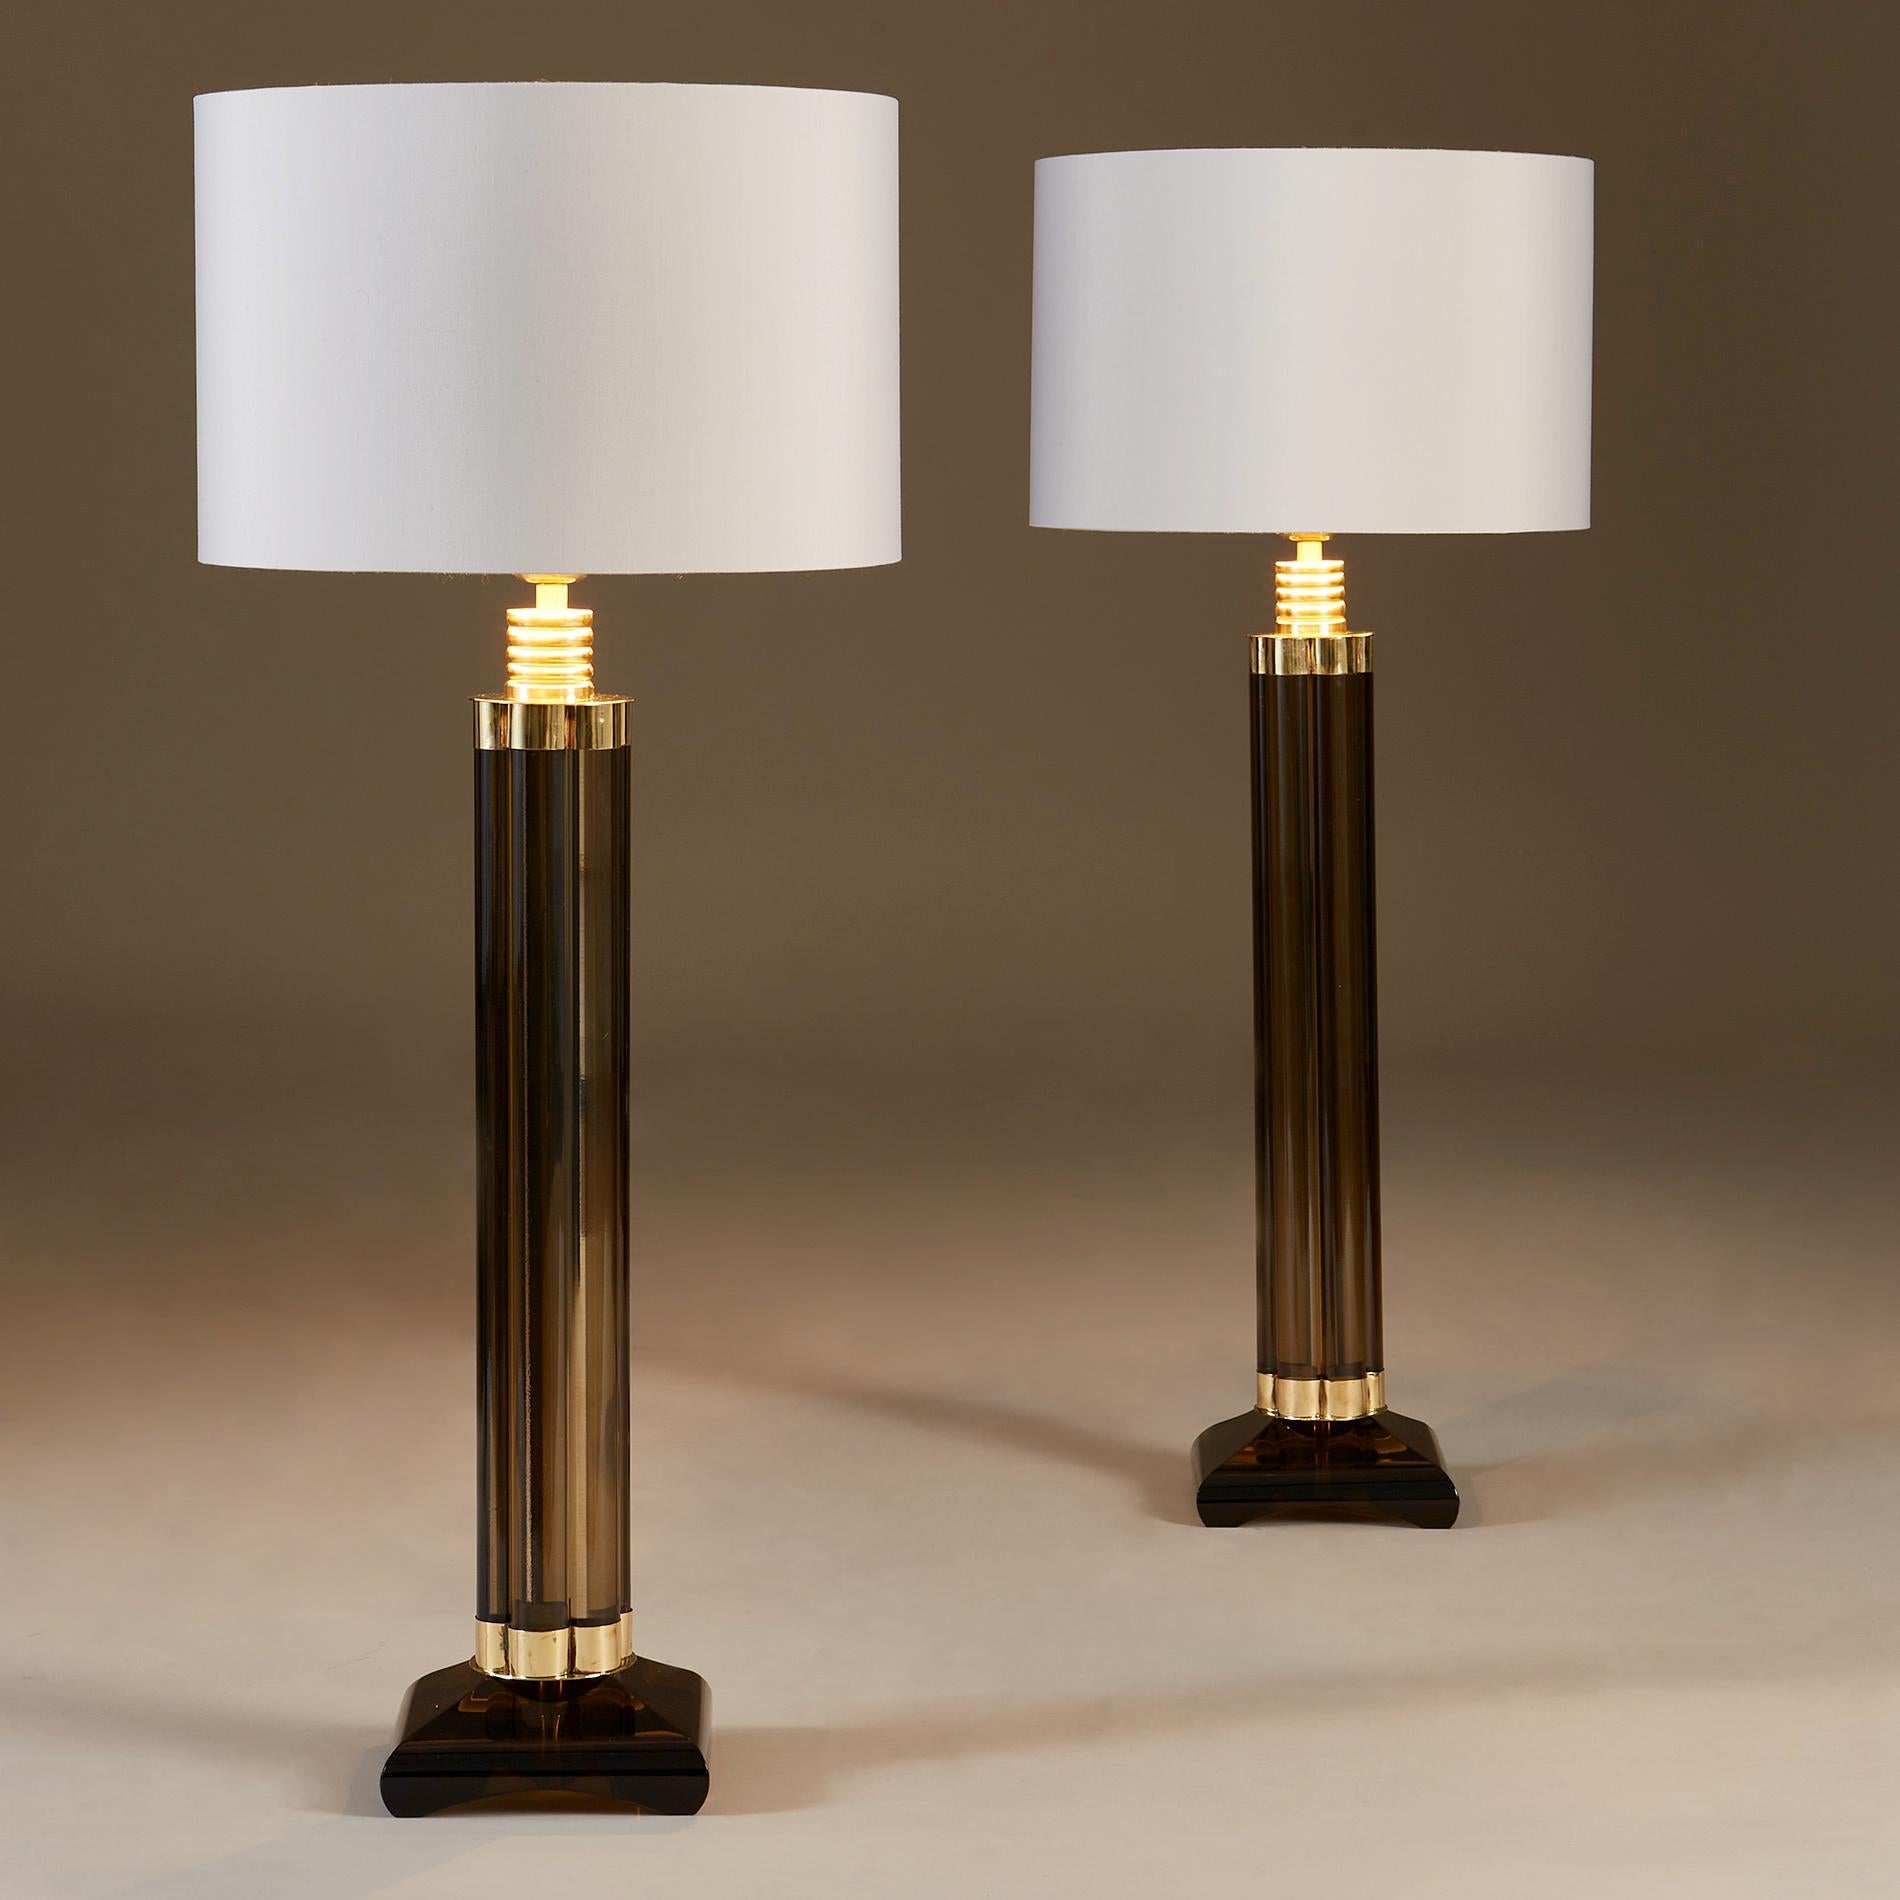 Striking pair of smokey Murano glass table lamps each made of six vertical glass rods held together at the top and bottom with decorative brass elements, standing on heavy square glass bases with rounded edges.
Height listed is without shades.

Also